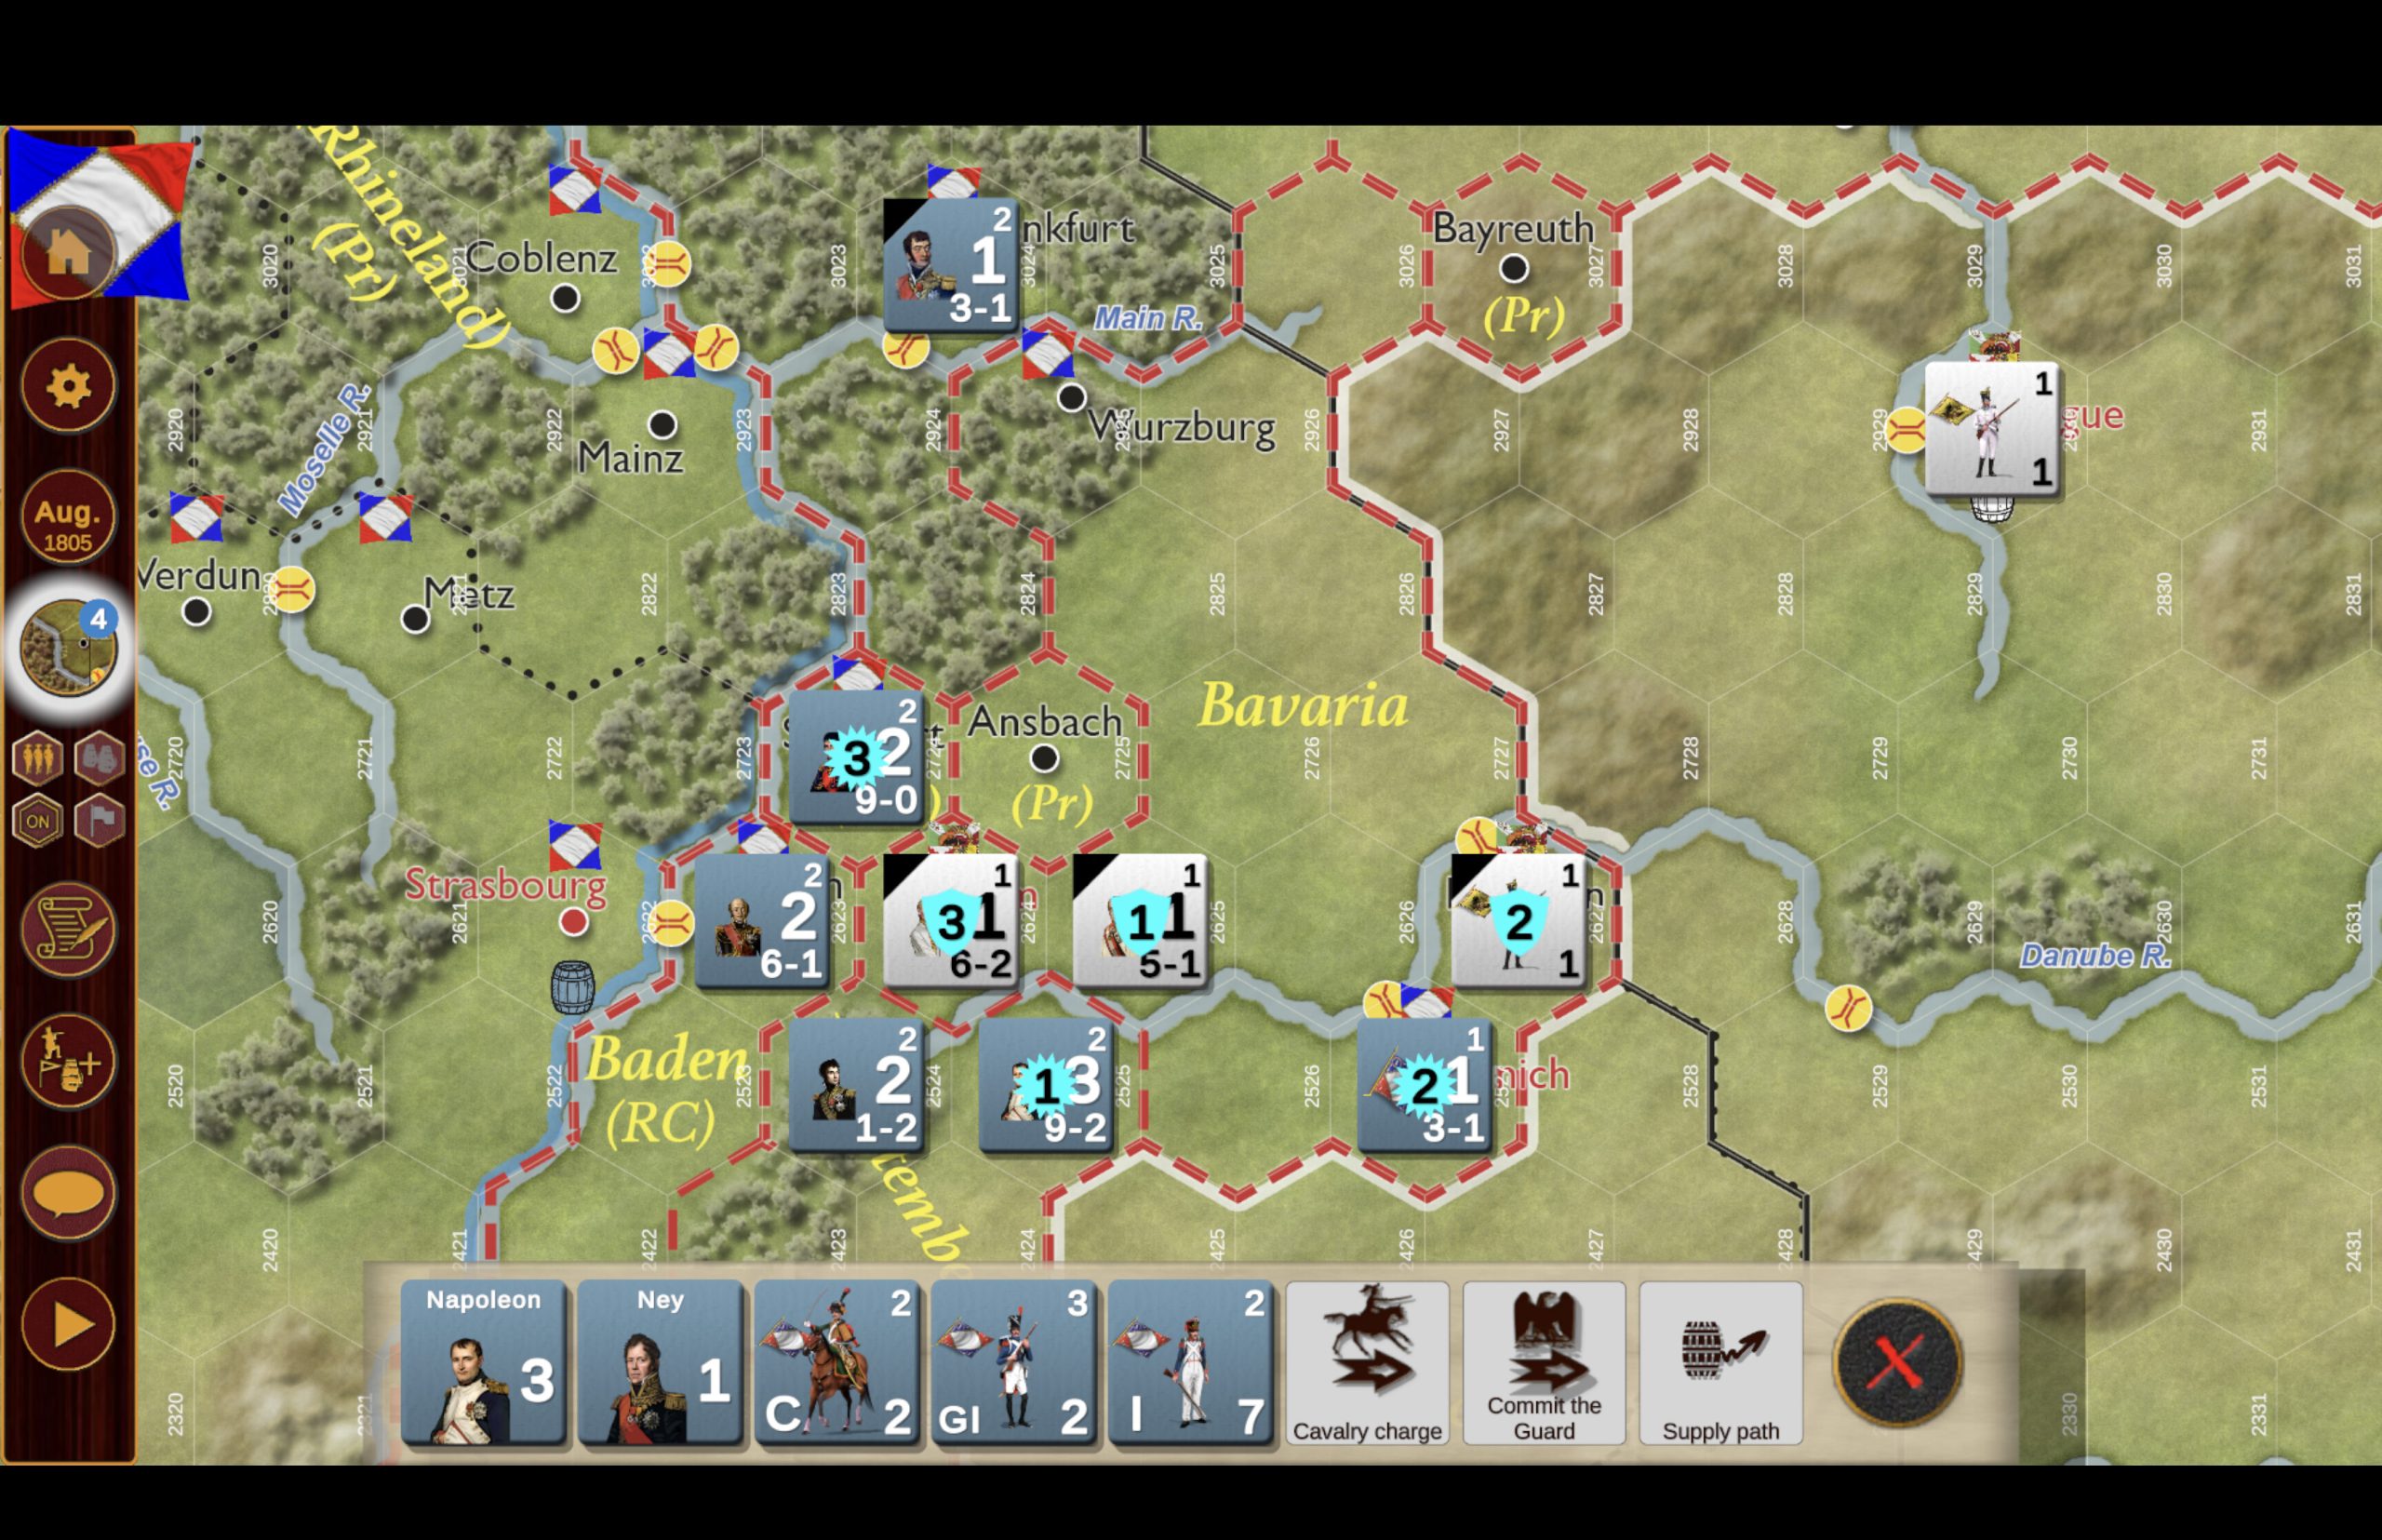 A screenshot from the Digital Edition of War and Peace